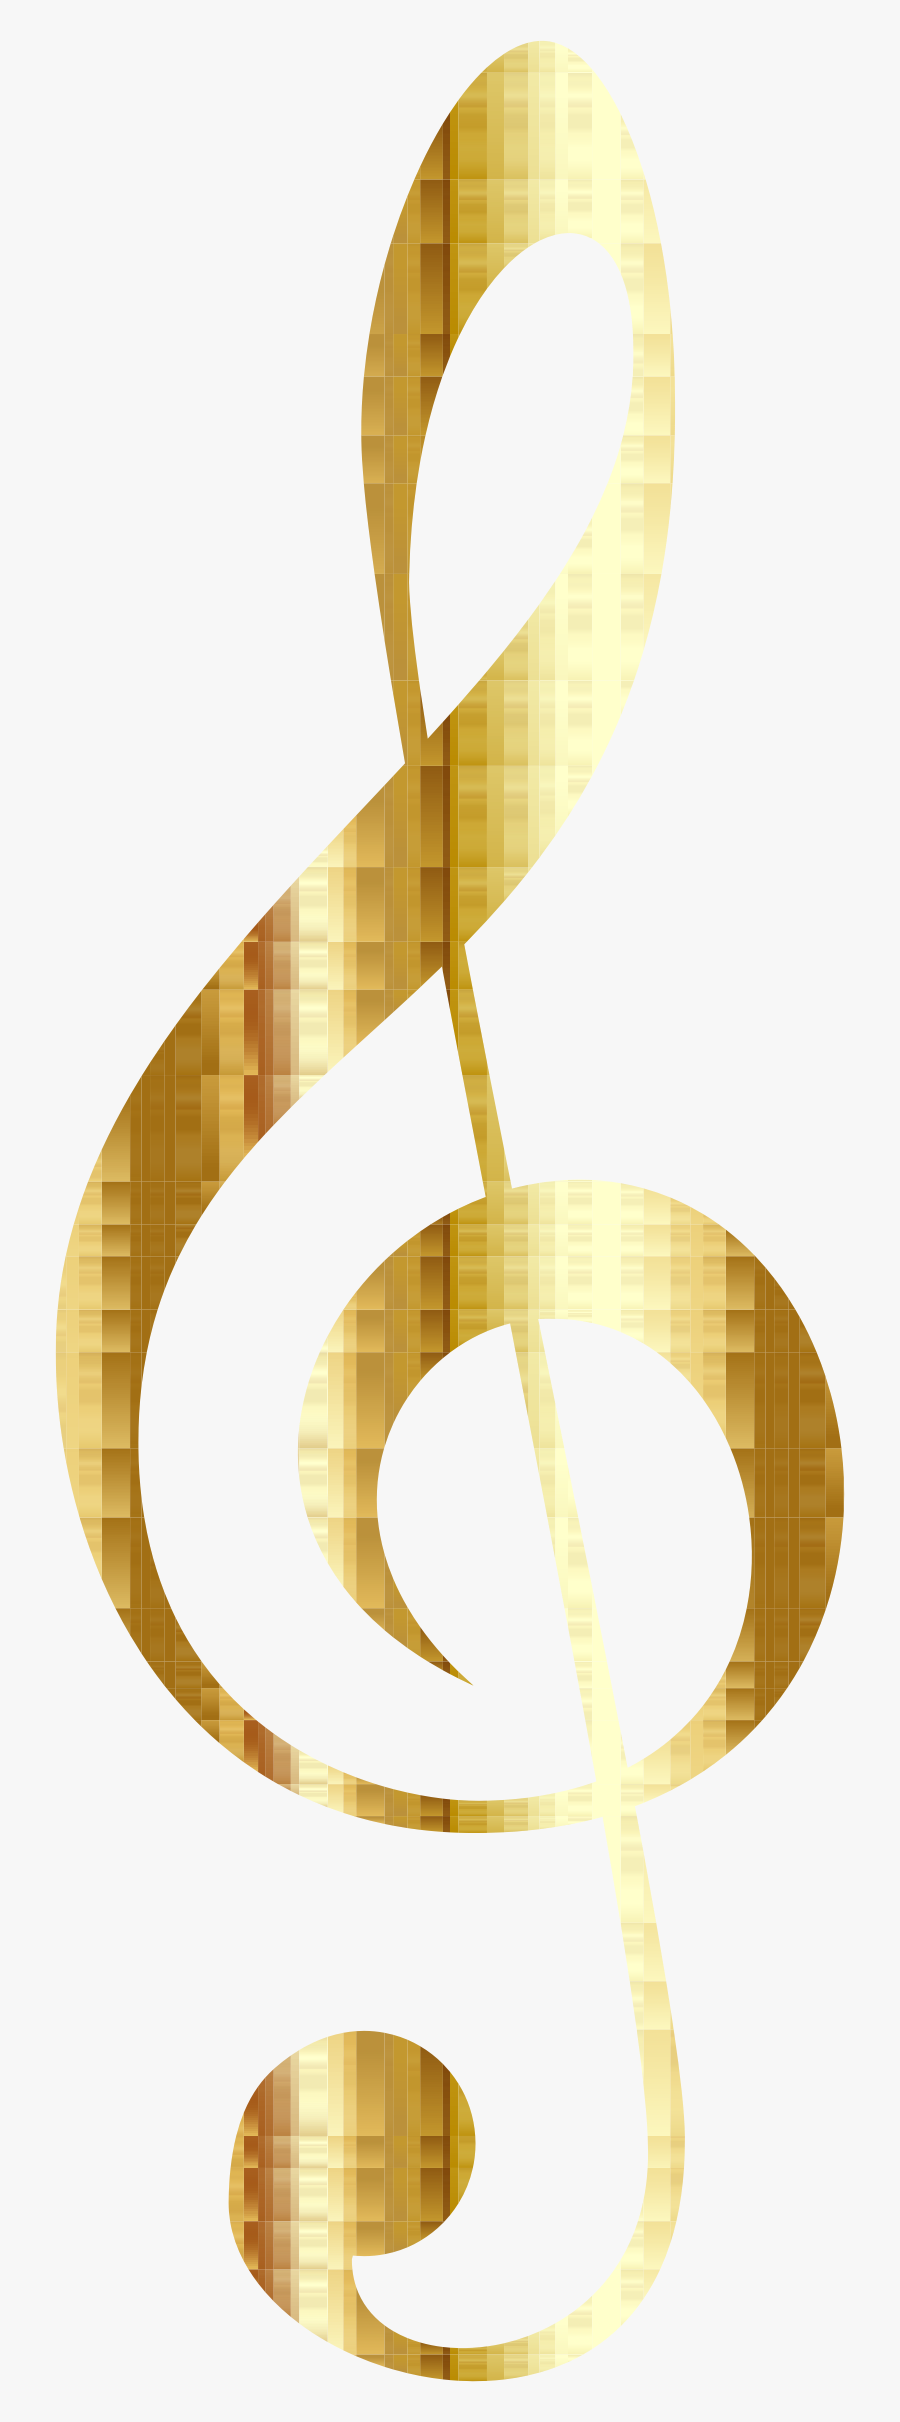 Gold Checkered Clef No Background Clip Arts - Gold Musical Notes Transparent, Transparent Clipart